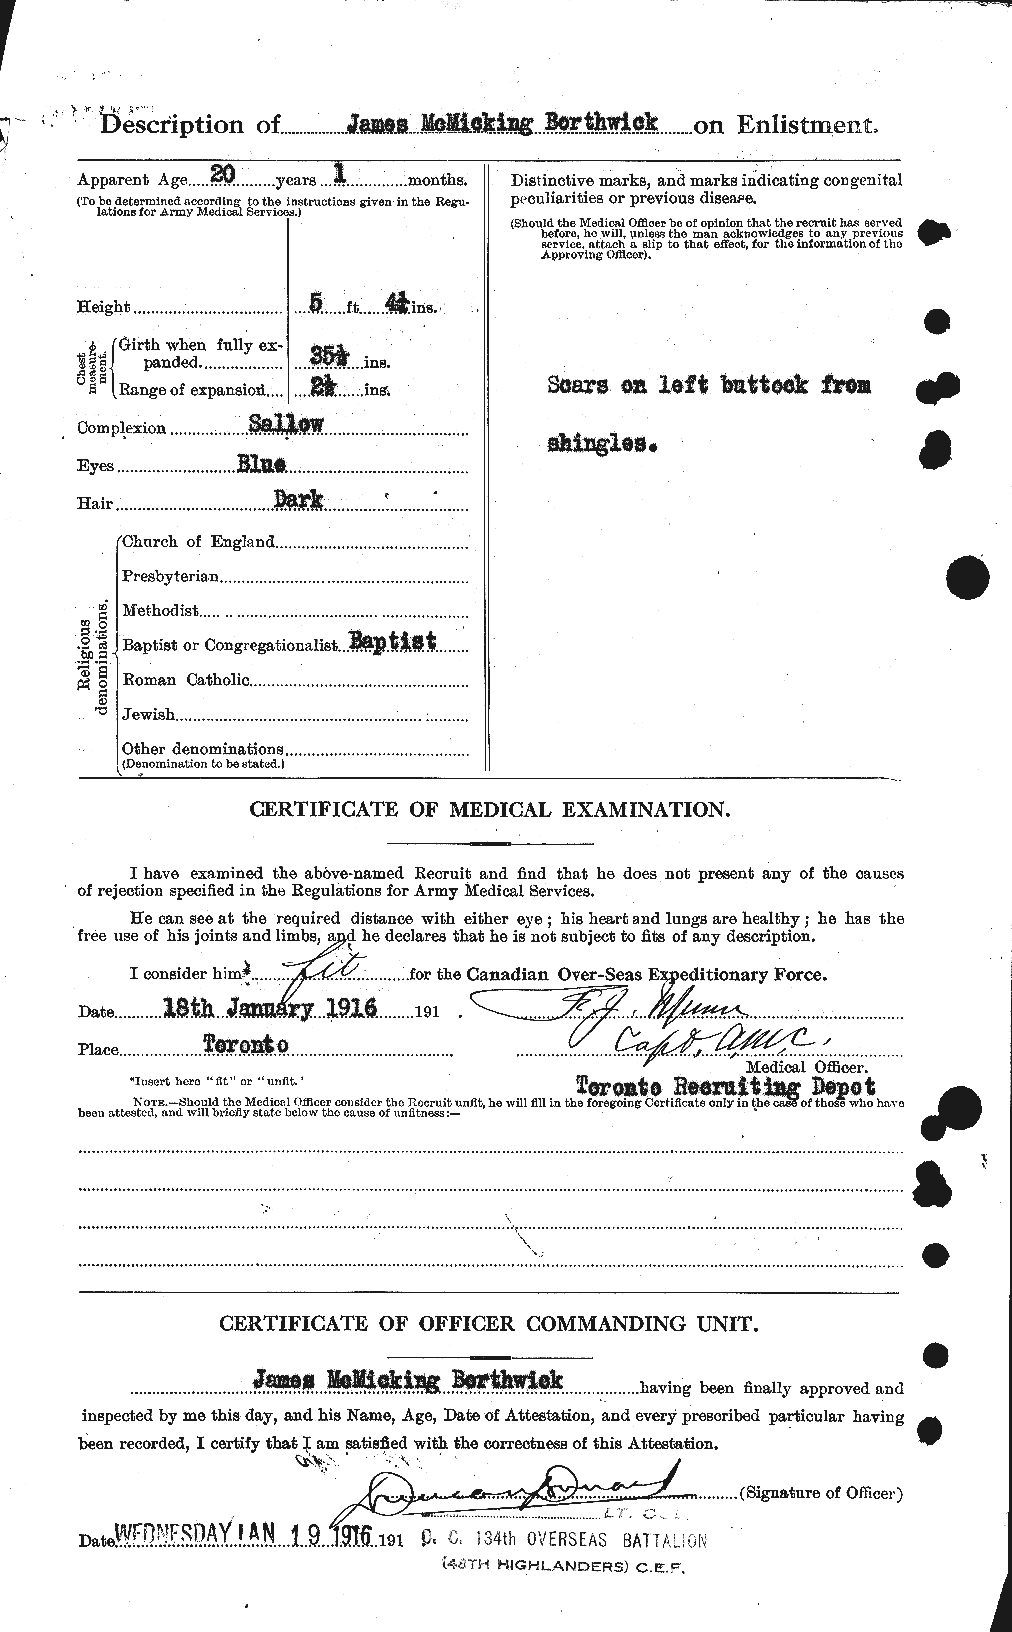 Personnel Records of the First World War - CEF 253503b